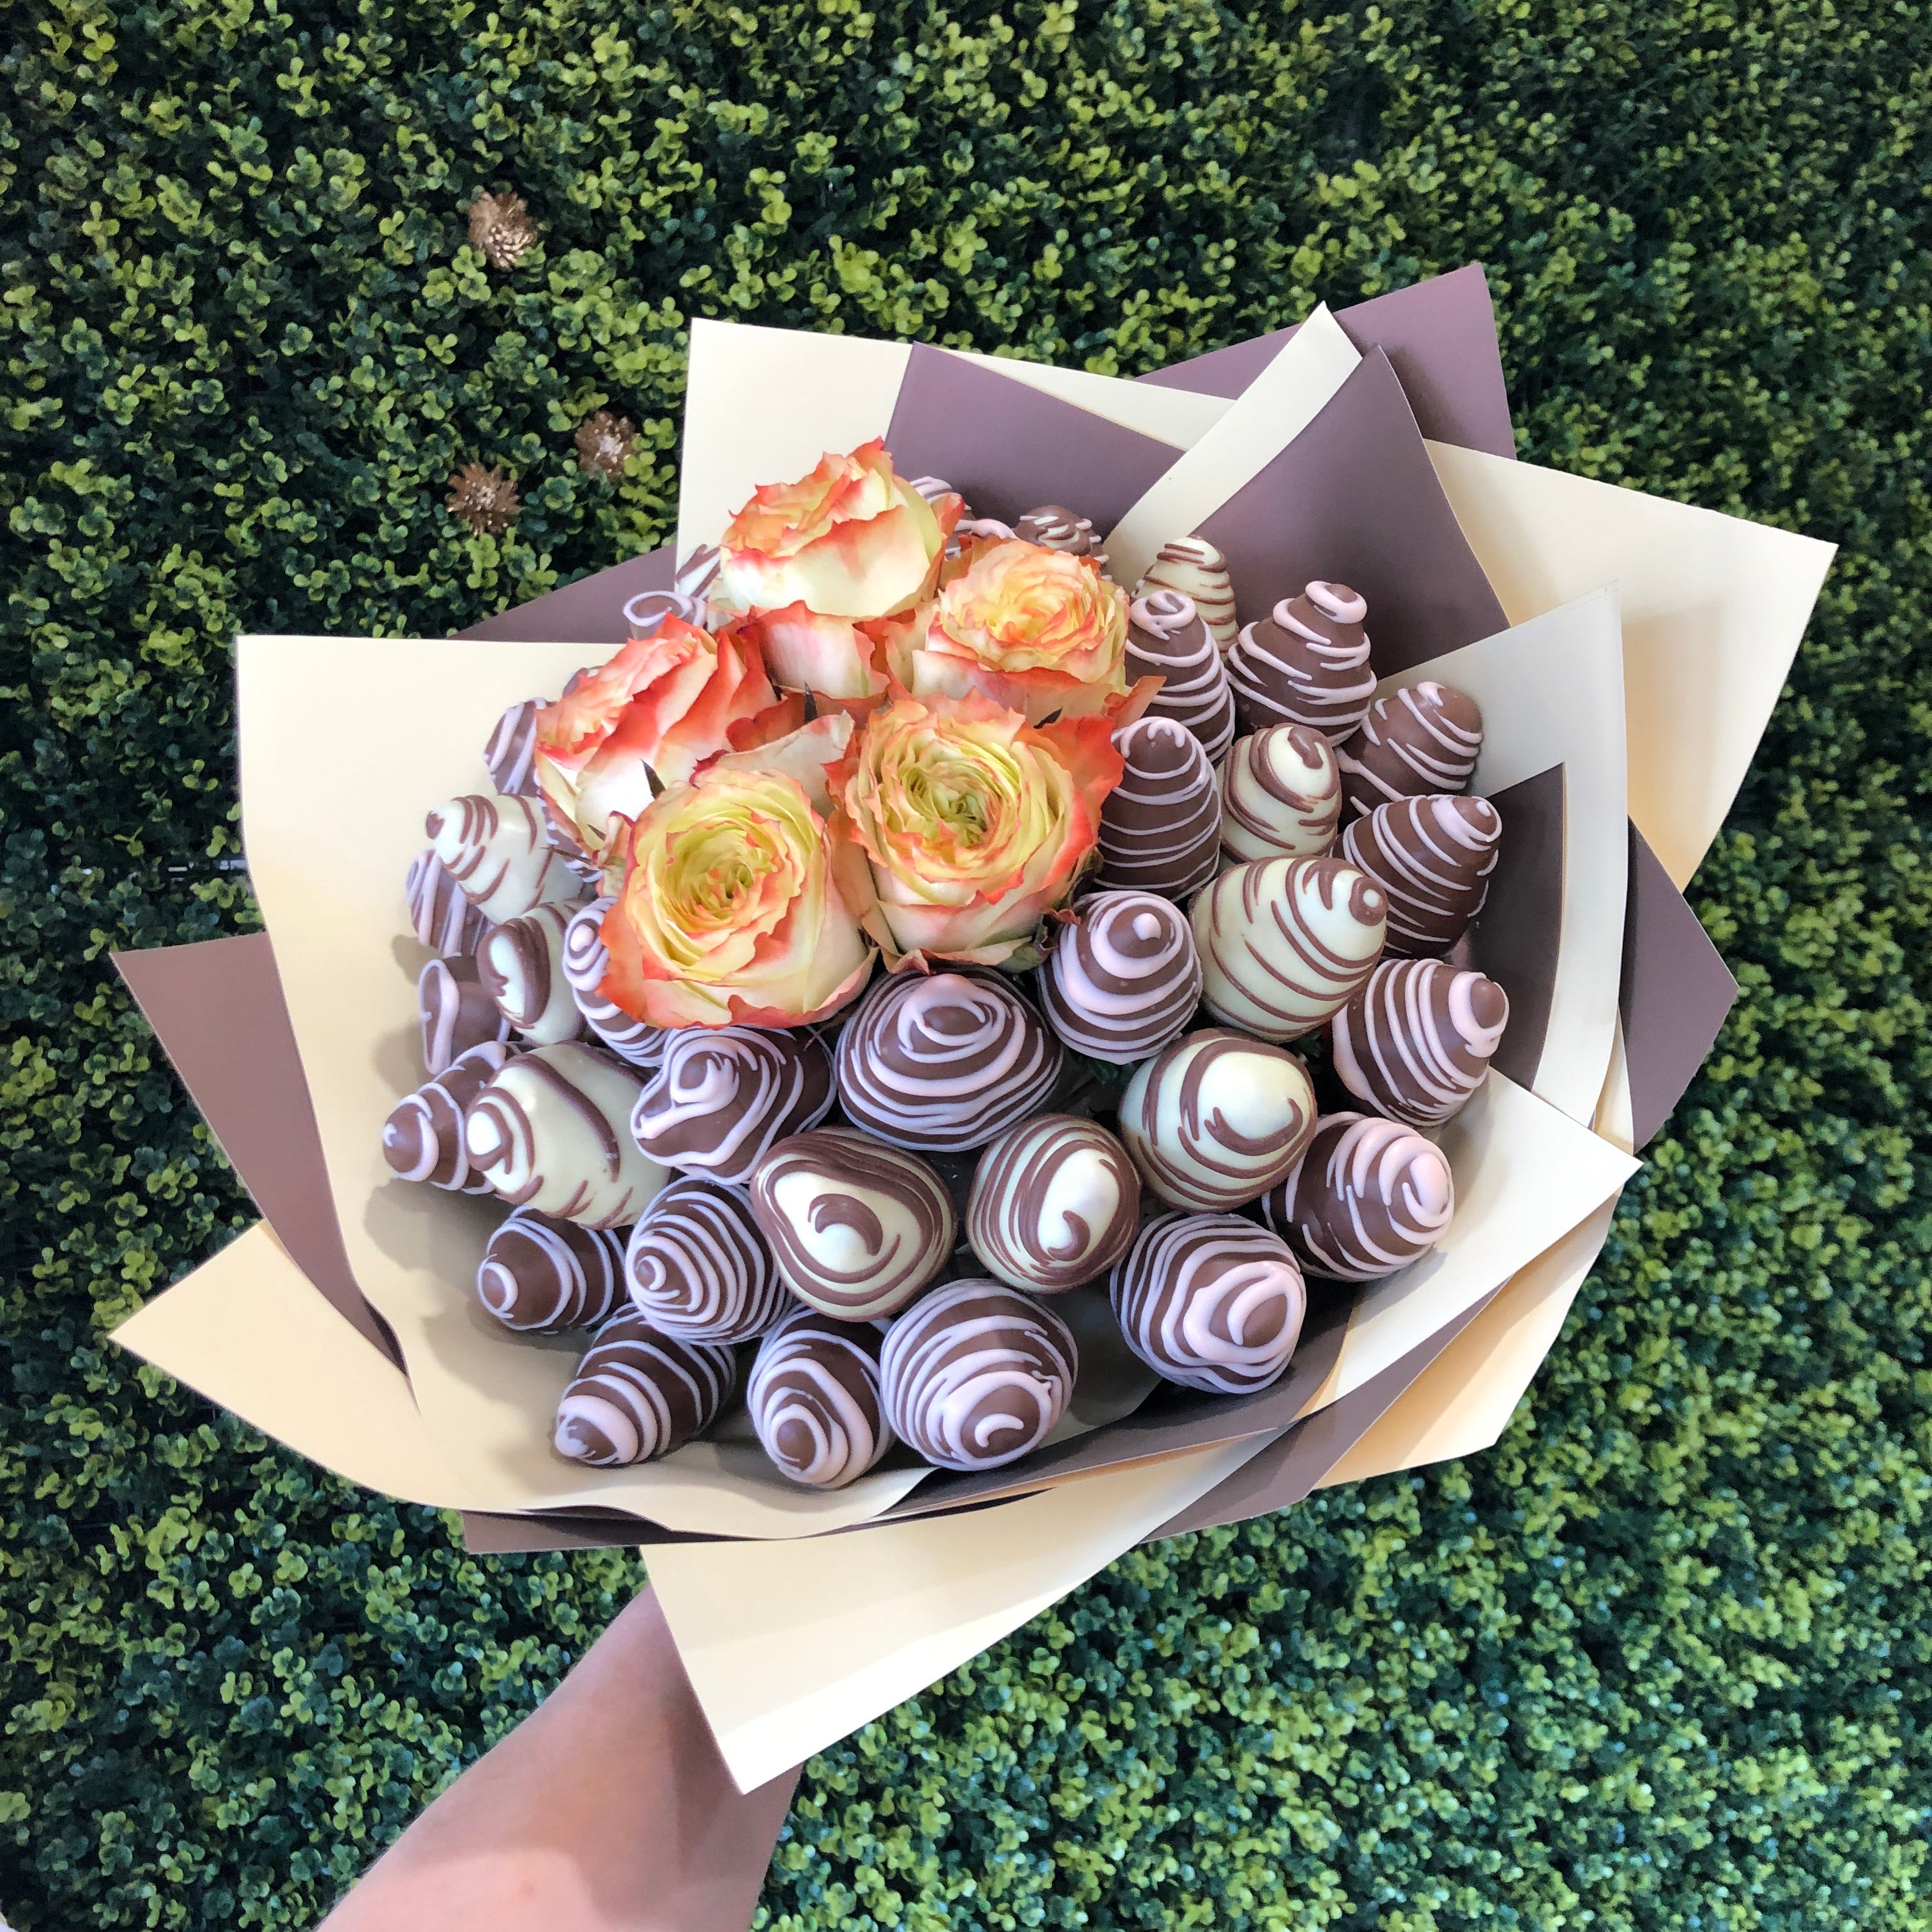 Roseberry Posie Chocolate Blooms Sweet Bouquet anniversary gift chocolate bouquet order online edible bouquet adelaide Delivery